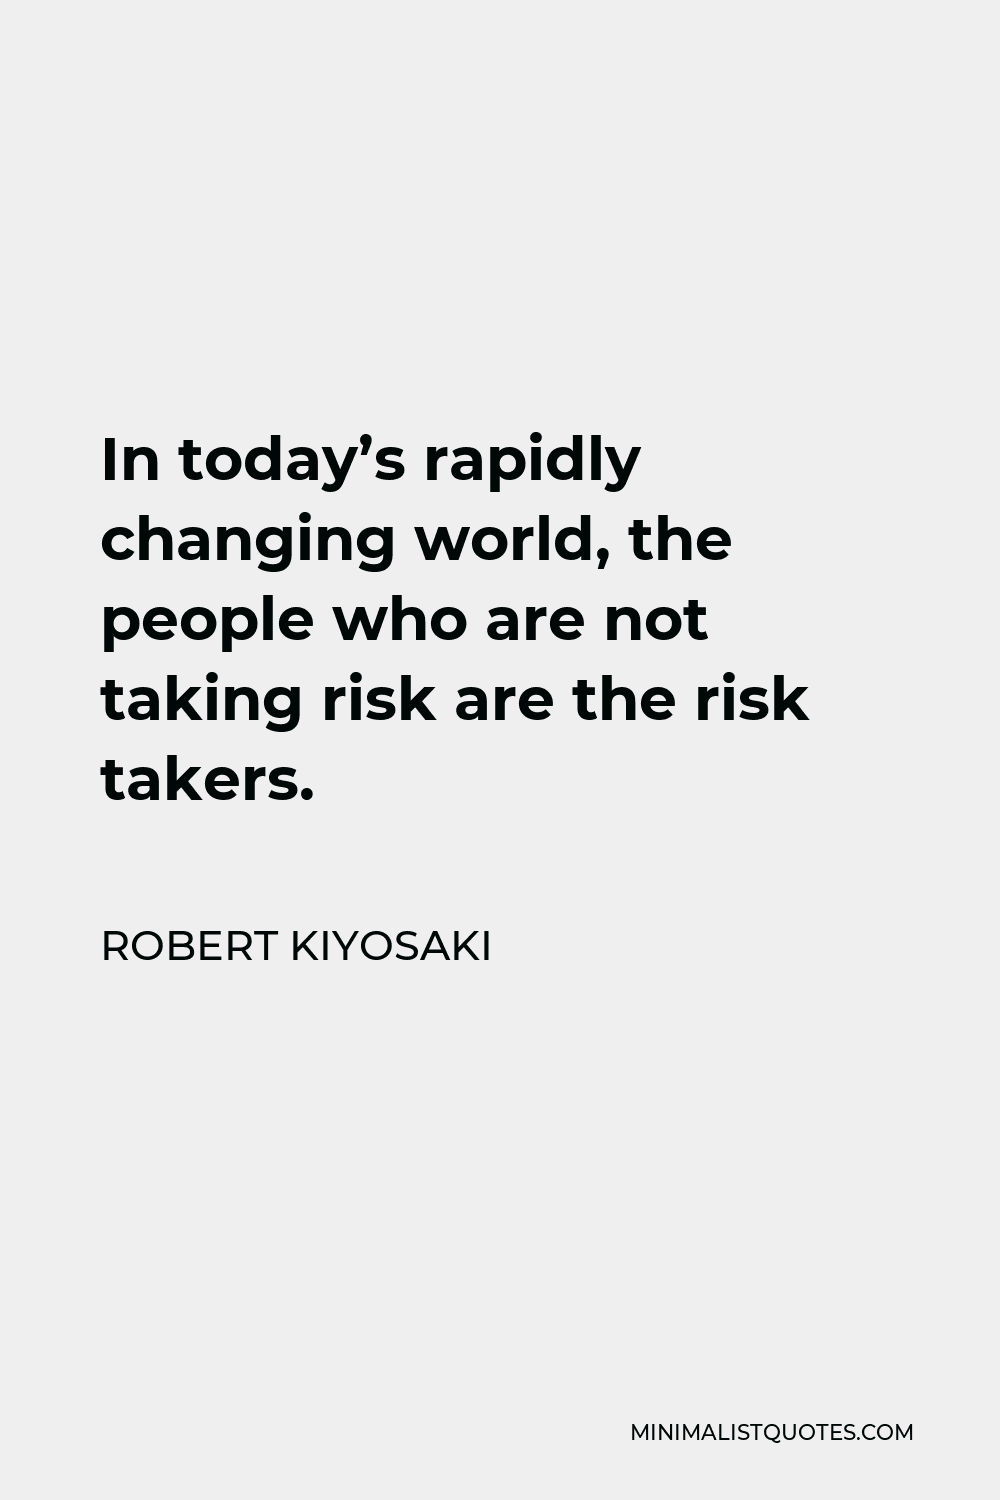 Robert Kiyosaki Quote - In today’s rapidly changing world, the people who are not taking risk are the risk takers.